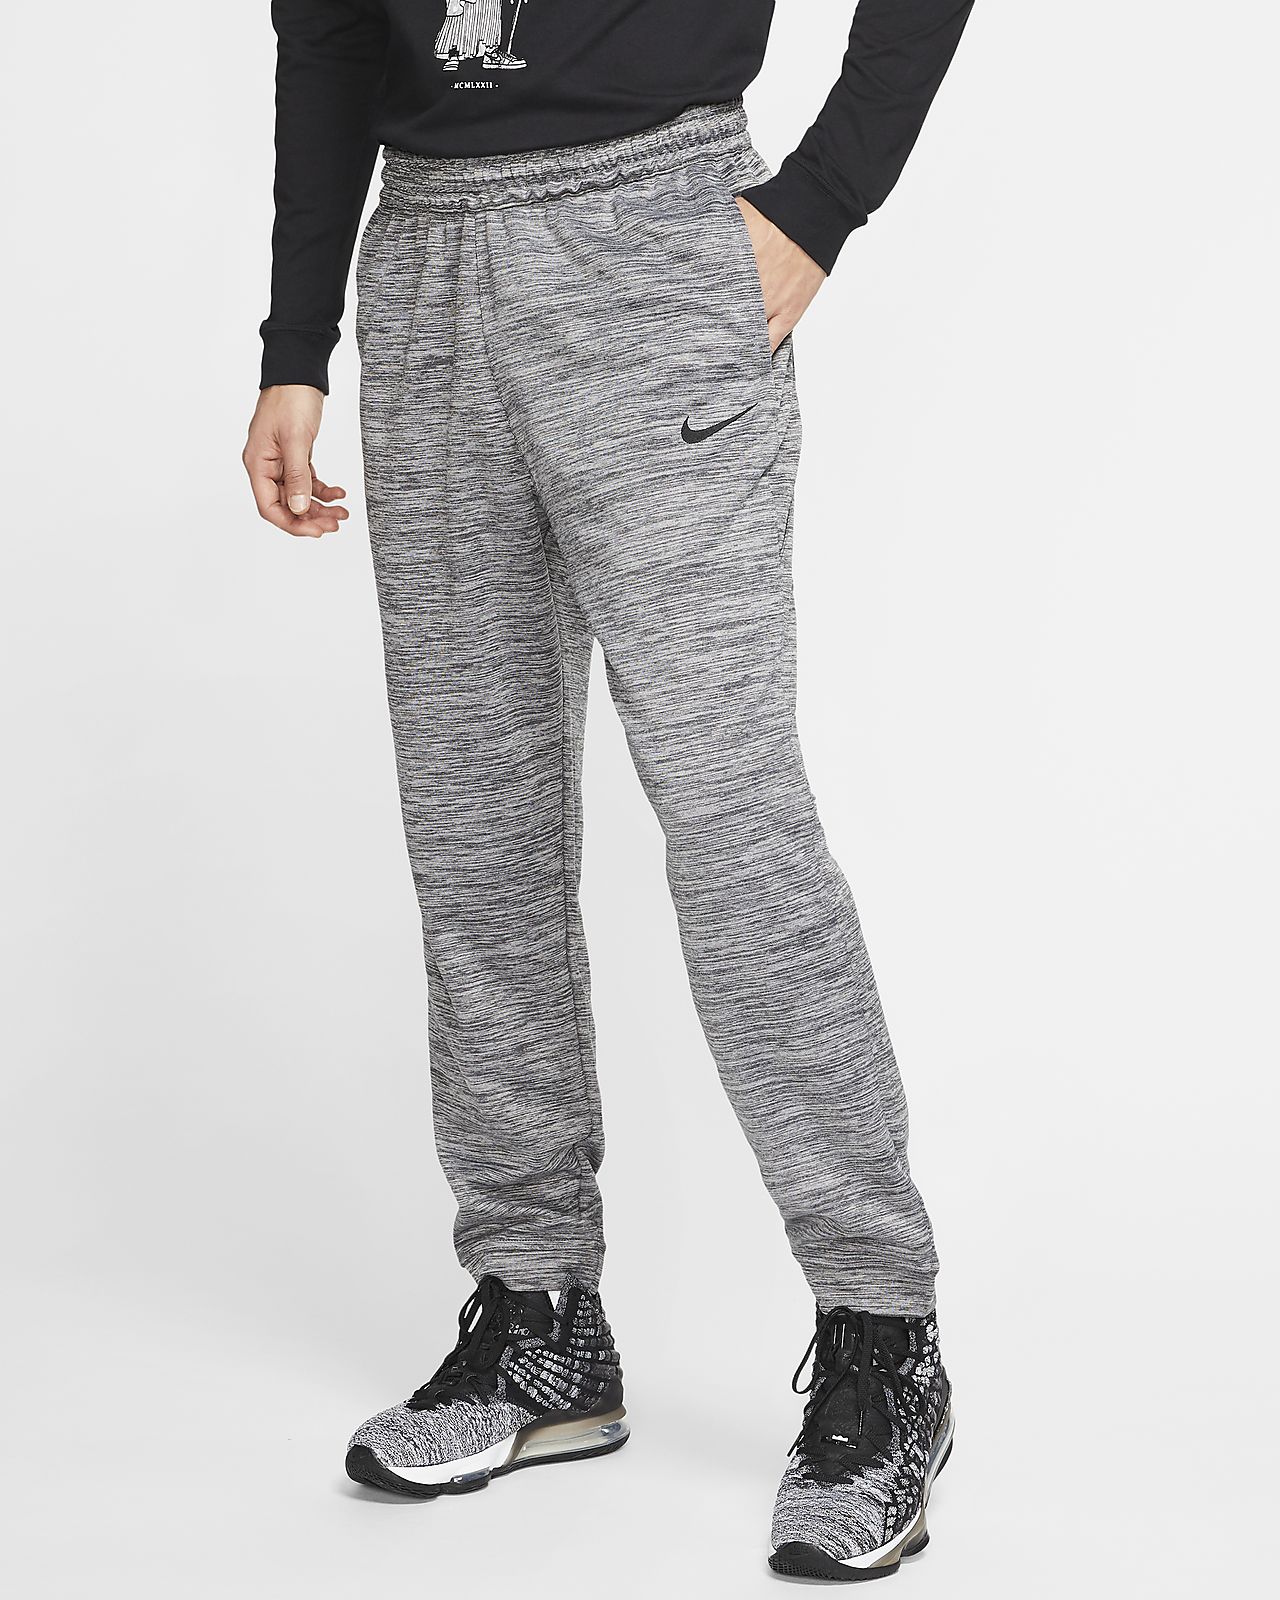 nike xl tall sweatpants coupon code for 